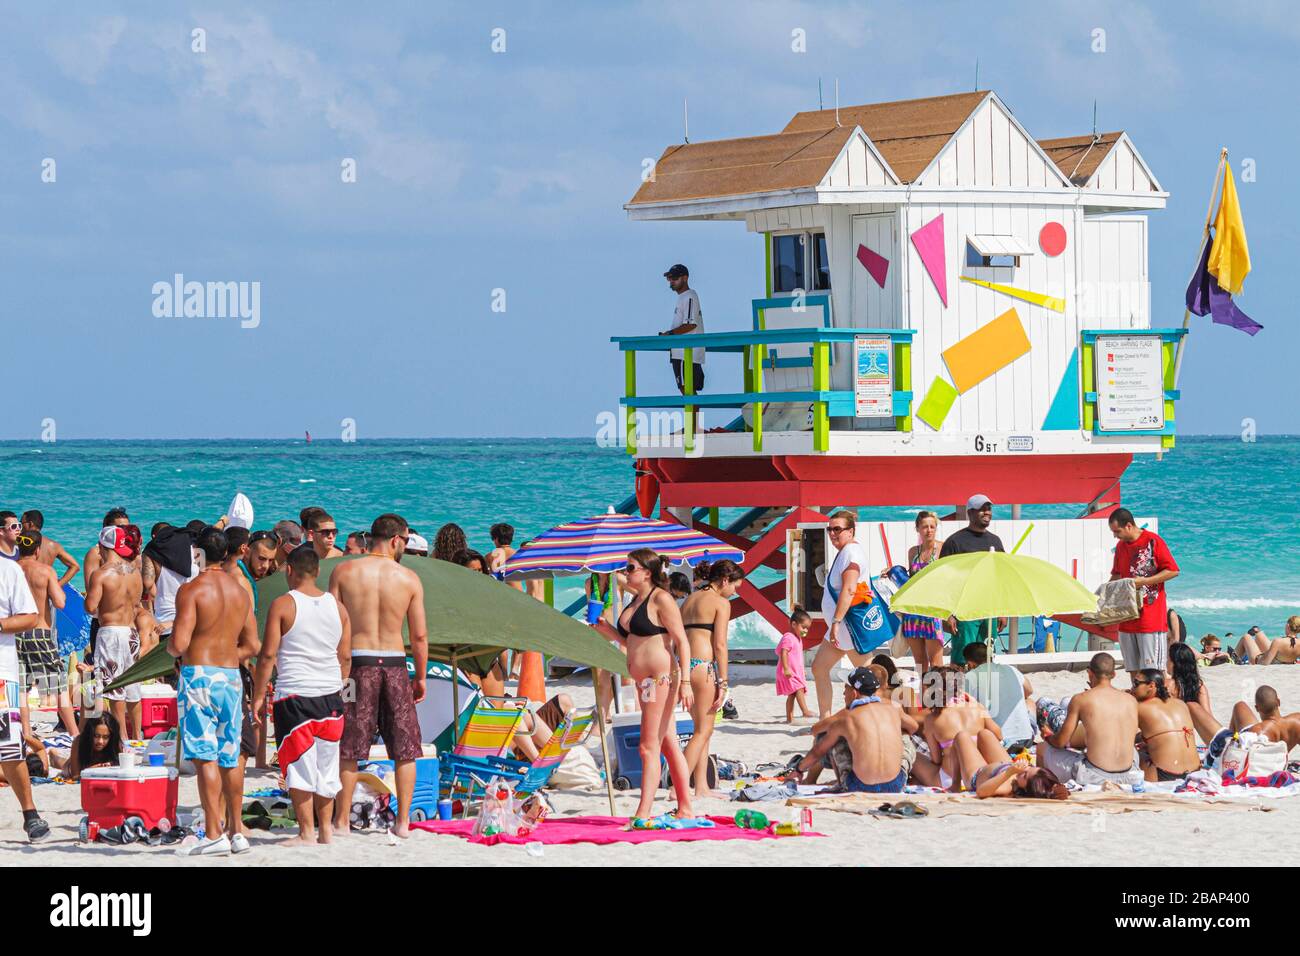 Miami Beach Florida,Atlantic Ocean,water,sunbathers,weekend,crowded,packed,Spring Break,student students lifeguard station,FL110429041 Stock Photo